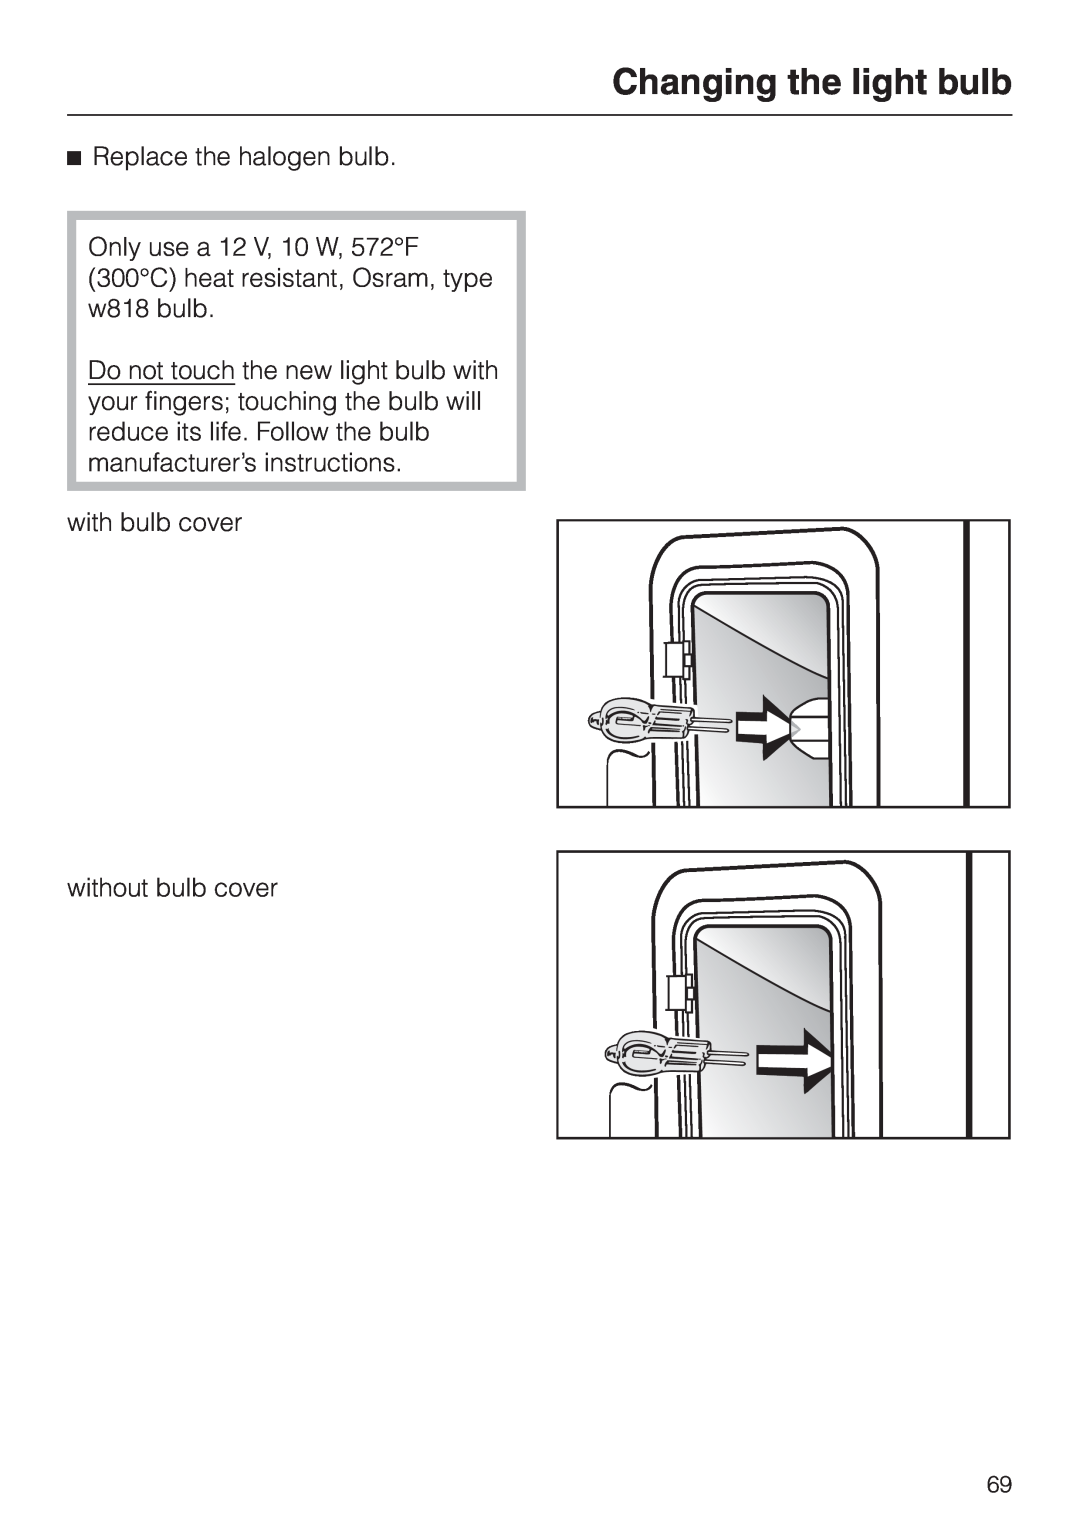 Miele H398BP2, H397BP2 Changing the light bulb, Replace the halogen bulb, with bulb cover without bulb cover 